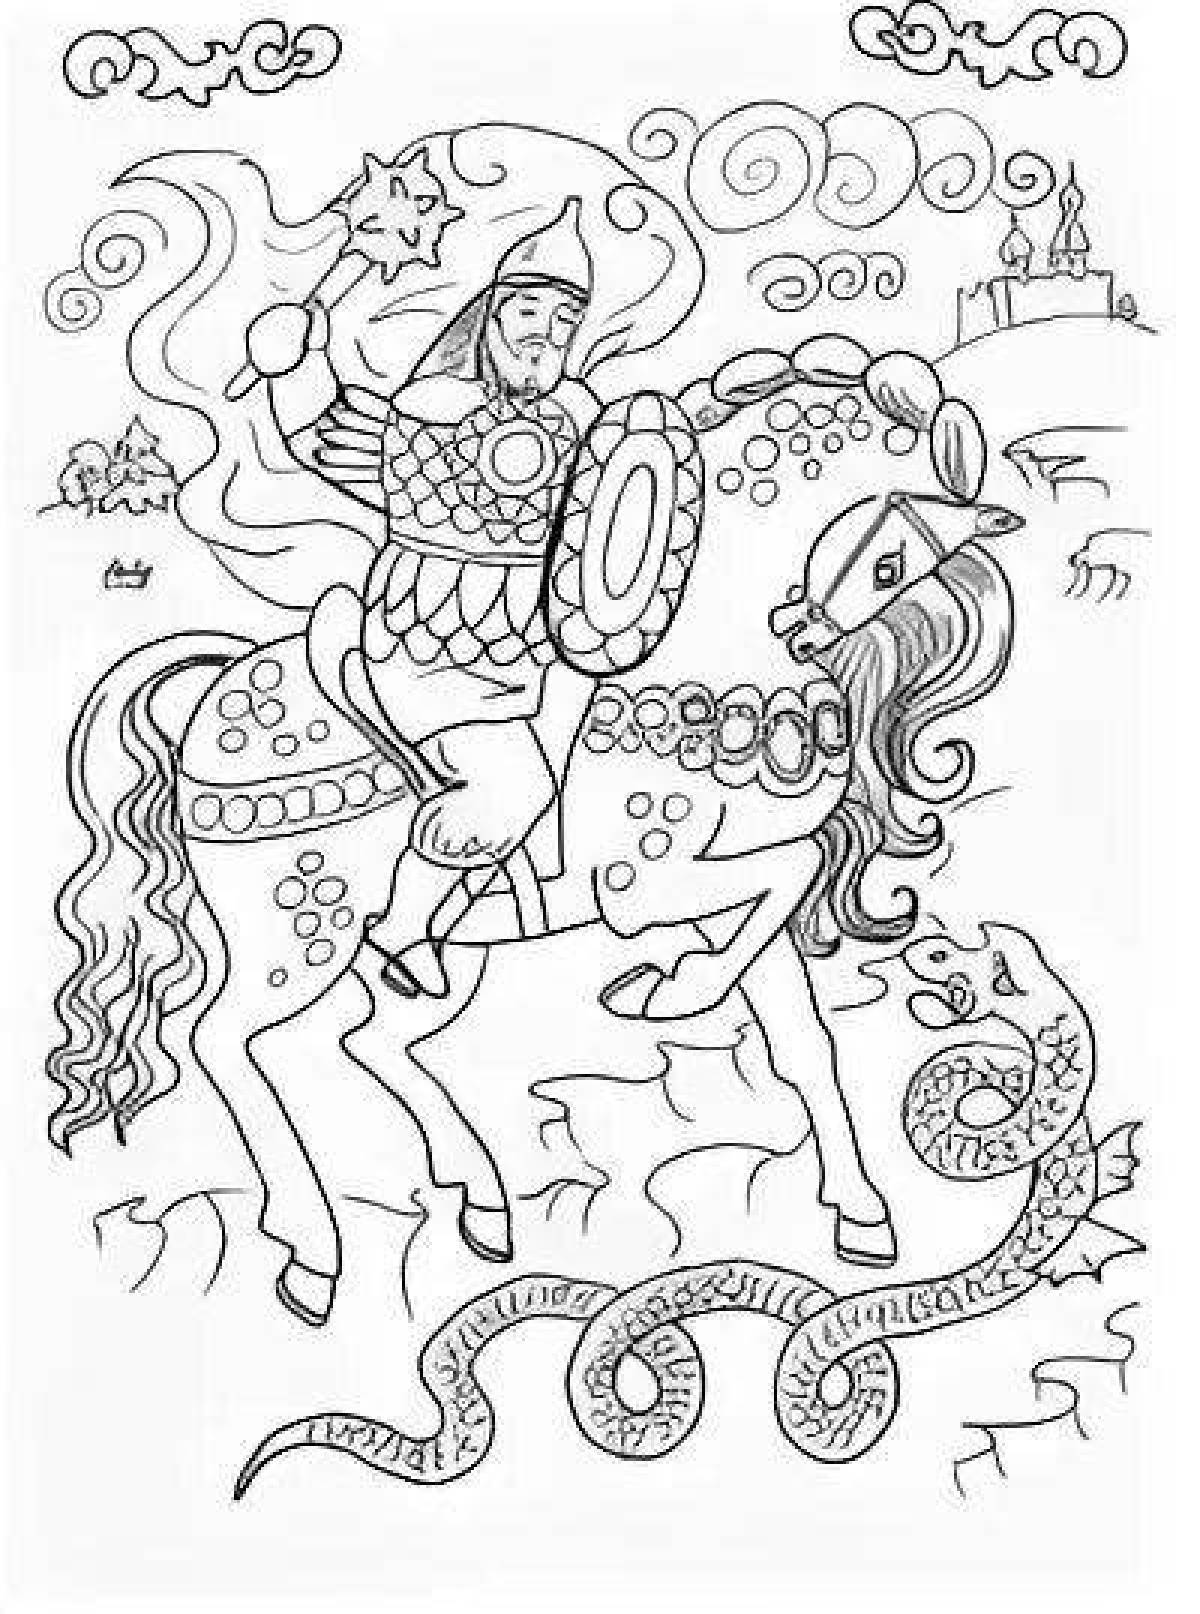 Coloring page charming palekh